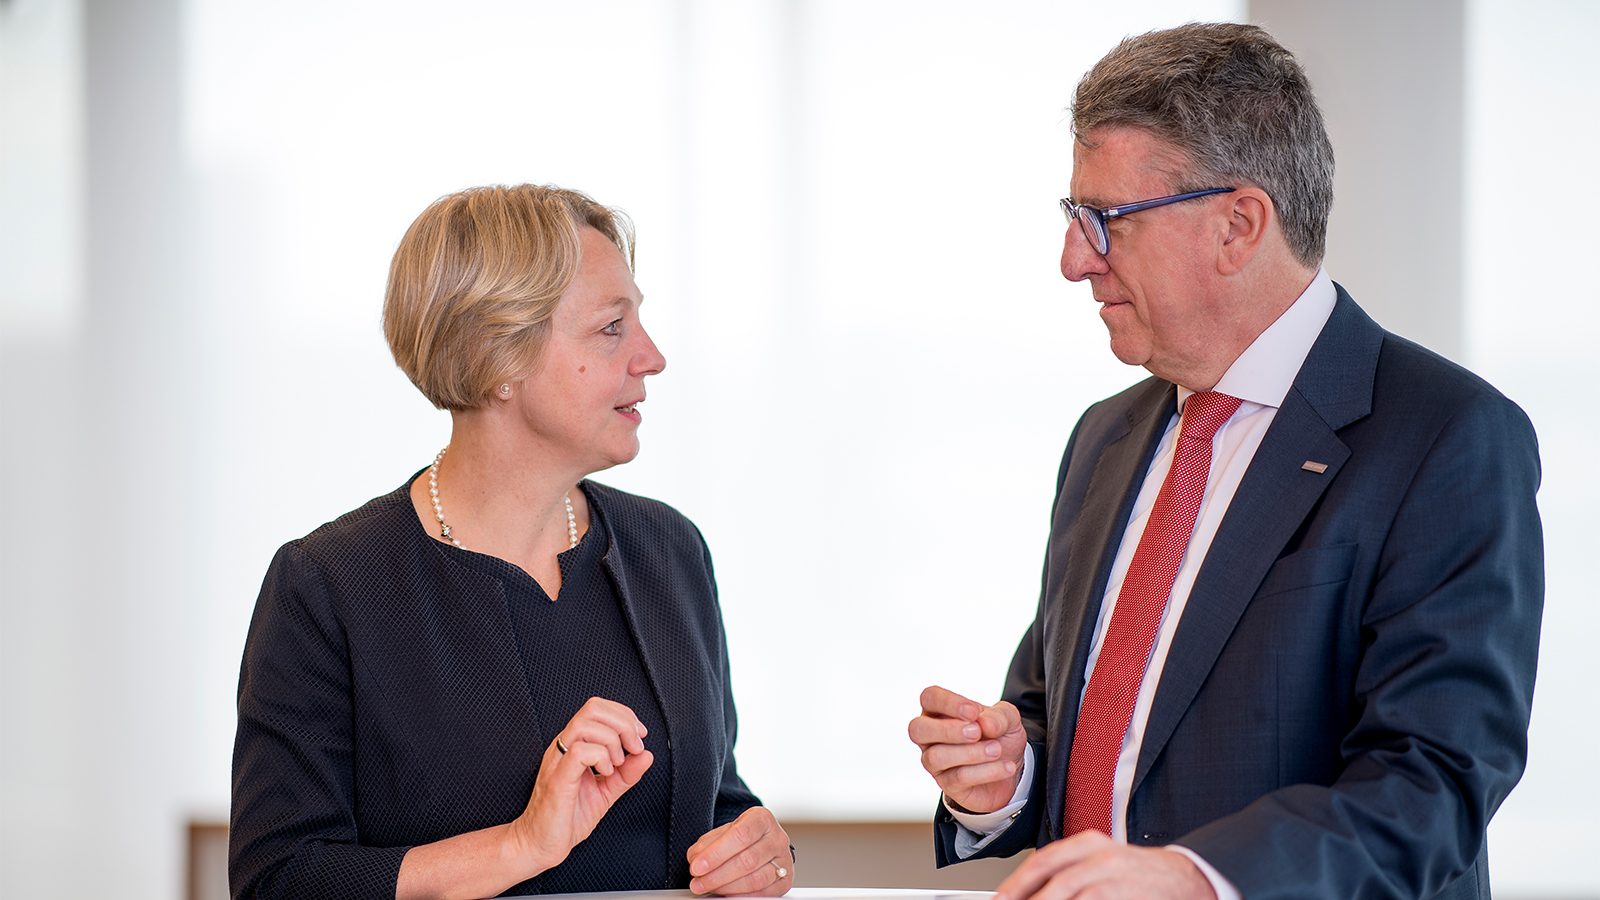 Sylvia Wolf-Britsch, HR development manager, and Thomas Ullrich, member of the Board of Managing Directors with responsibility for Human Resources